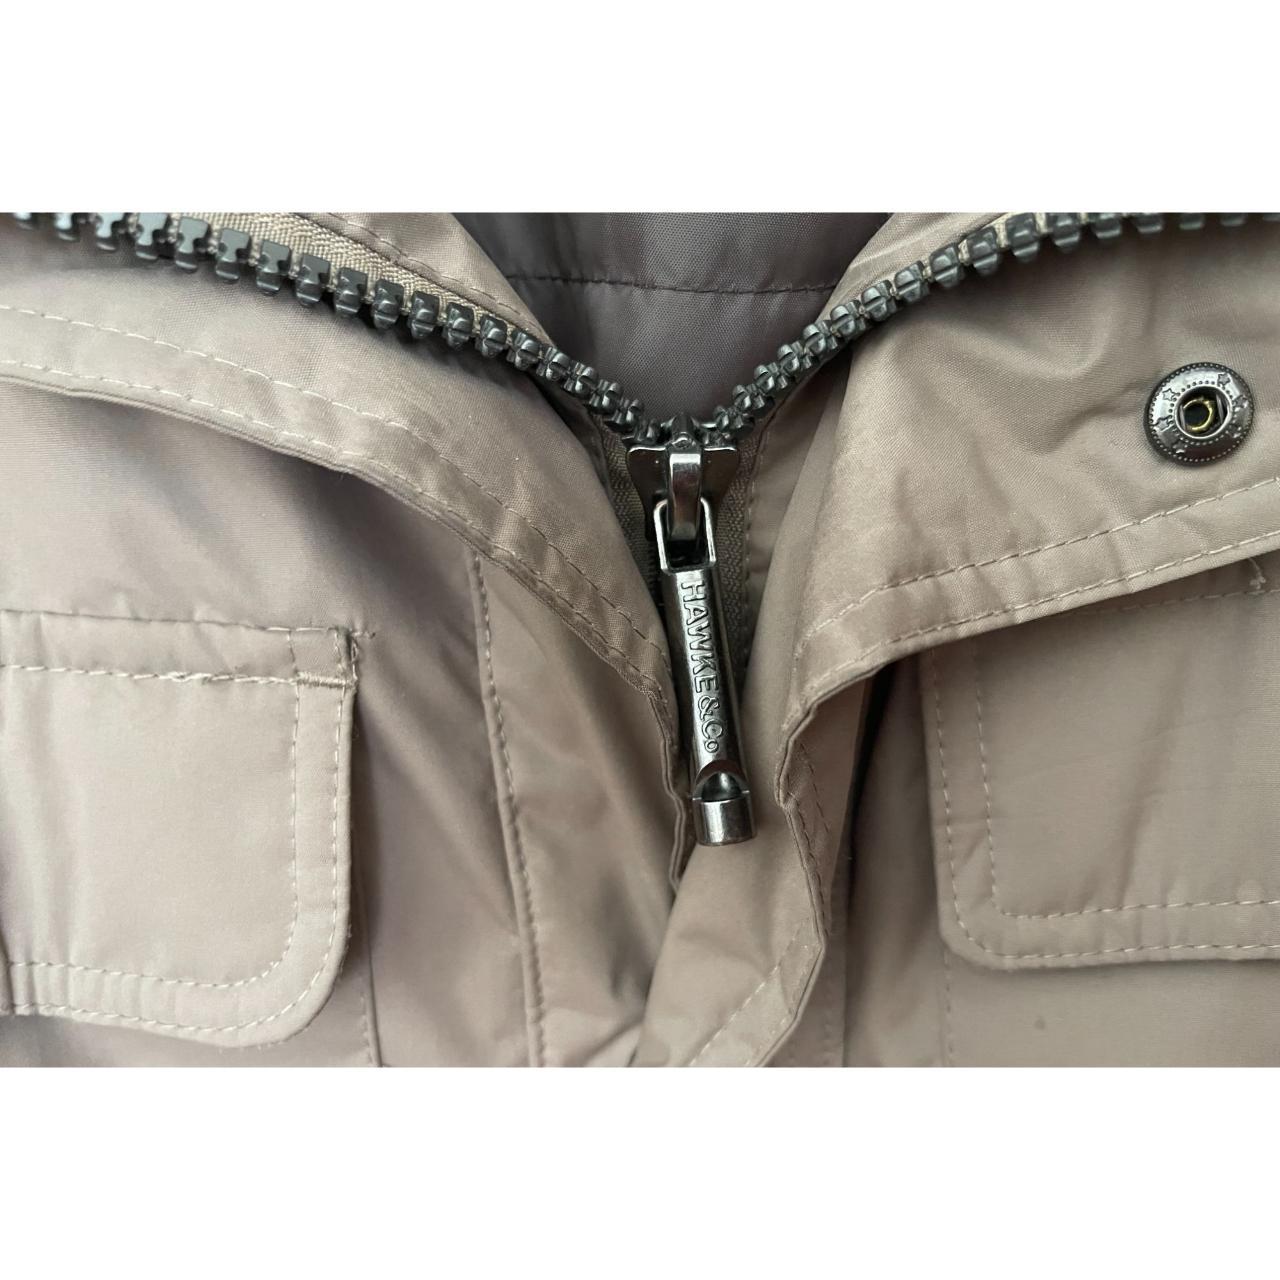 Product Image 3 - Mens heavy Anorak
Well-made, durable hardware
Missing